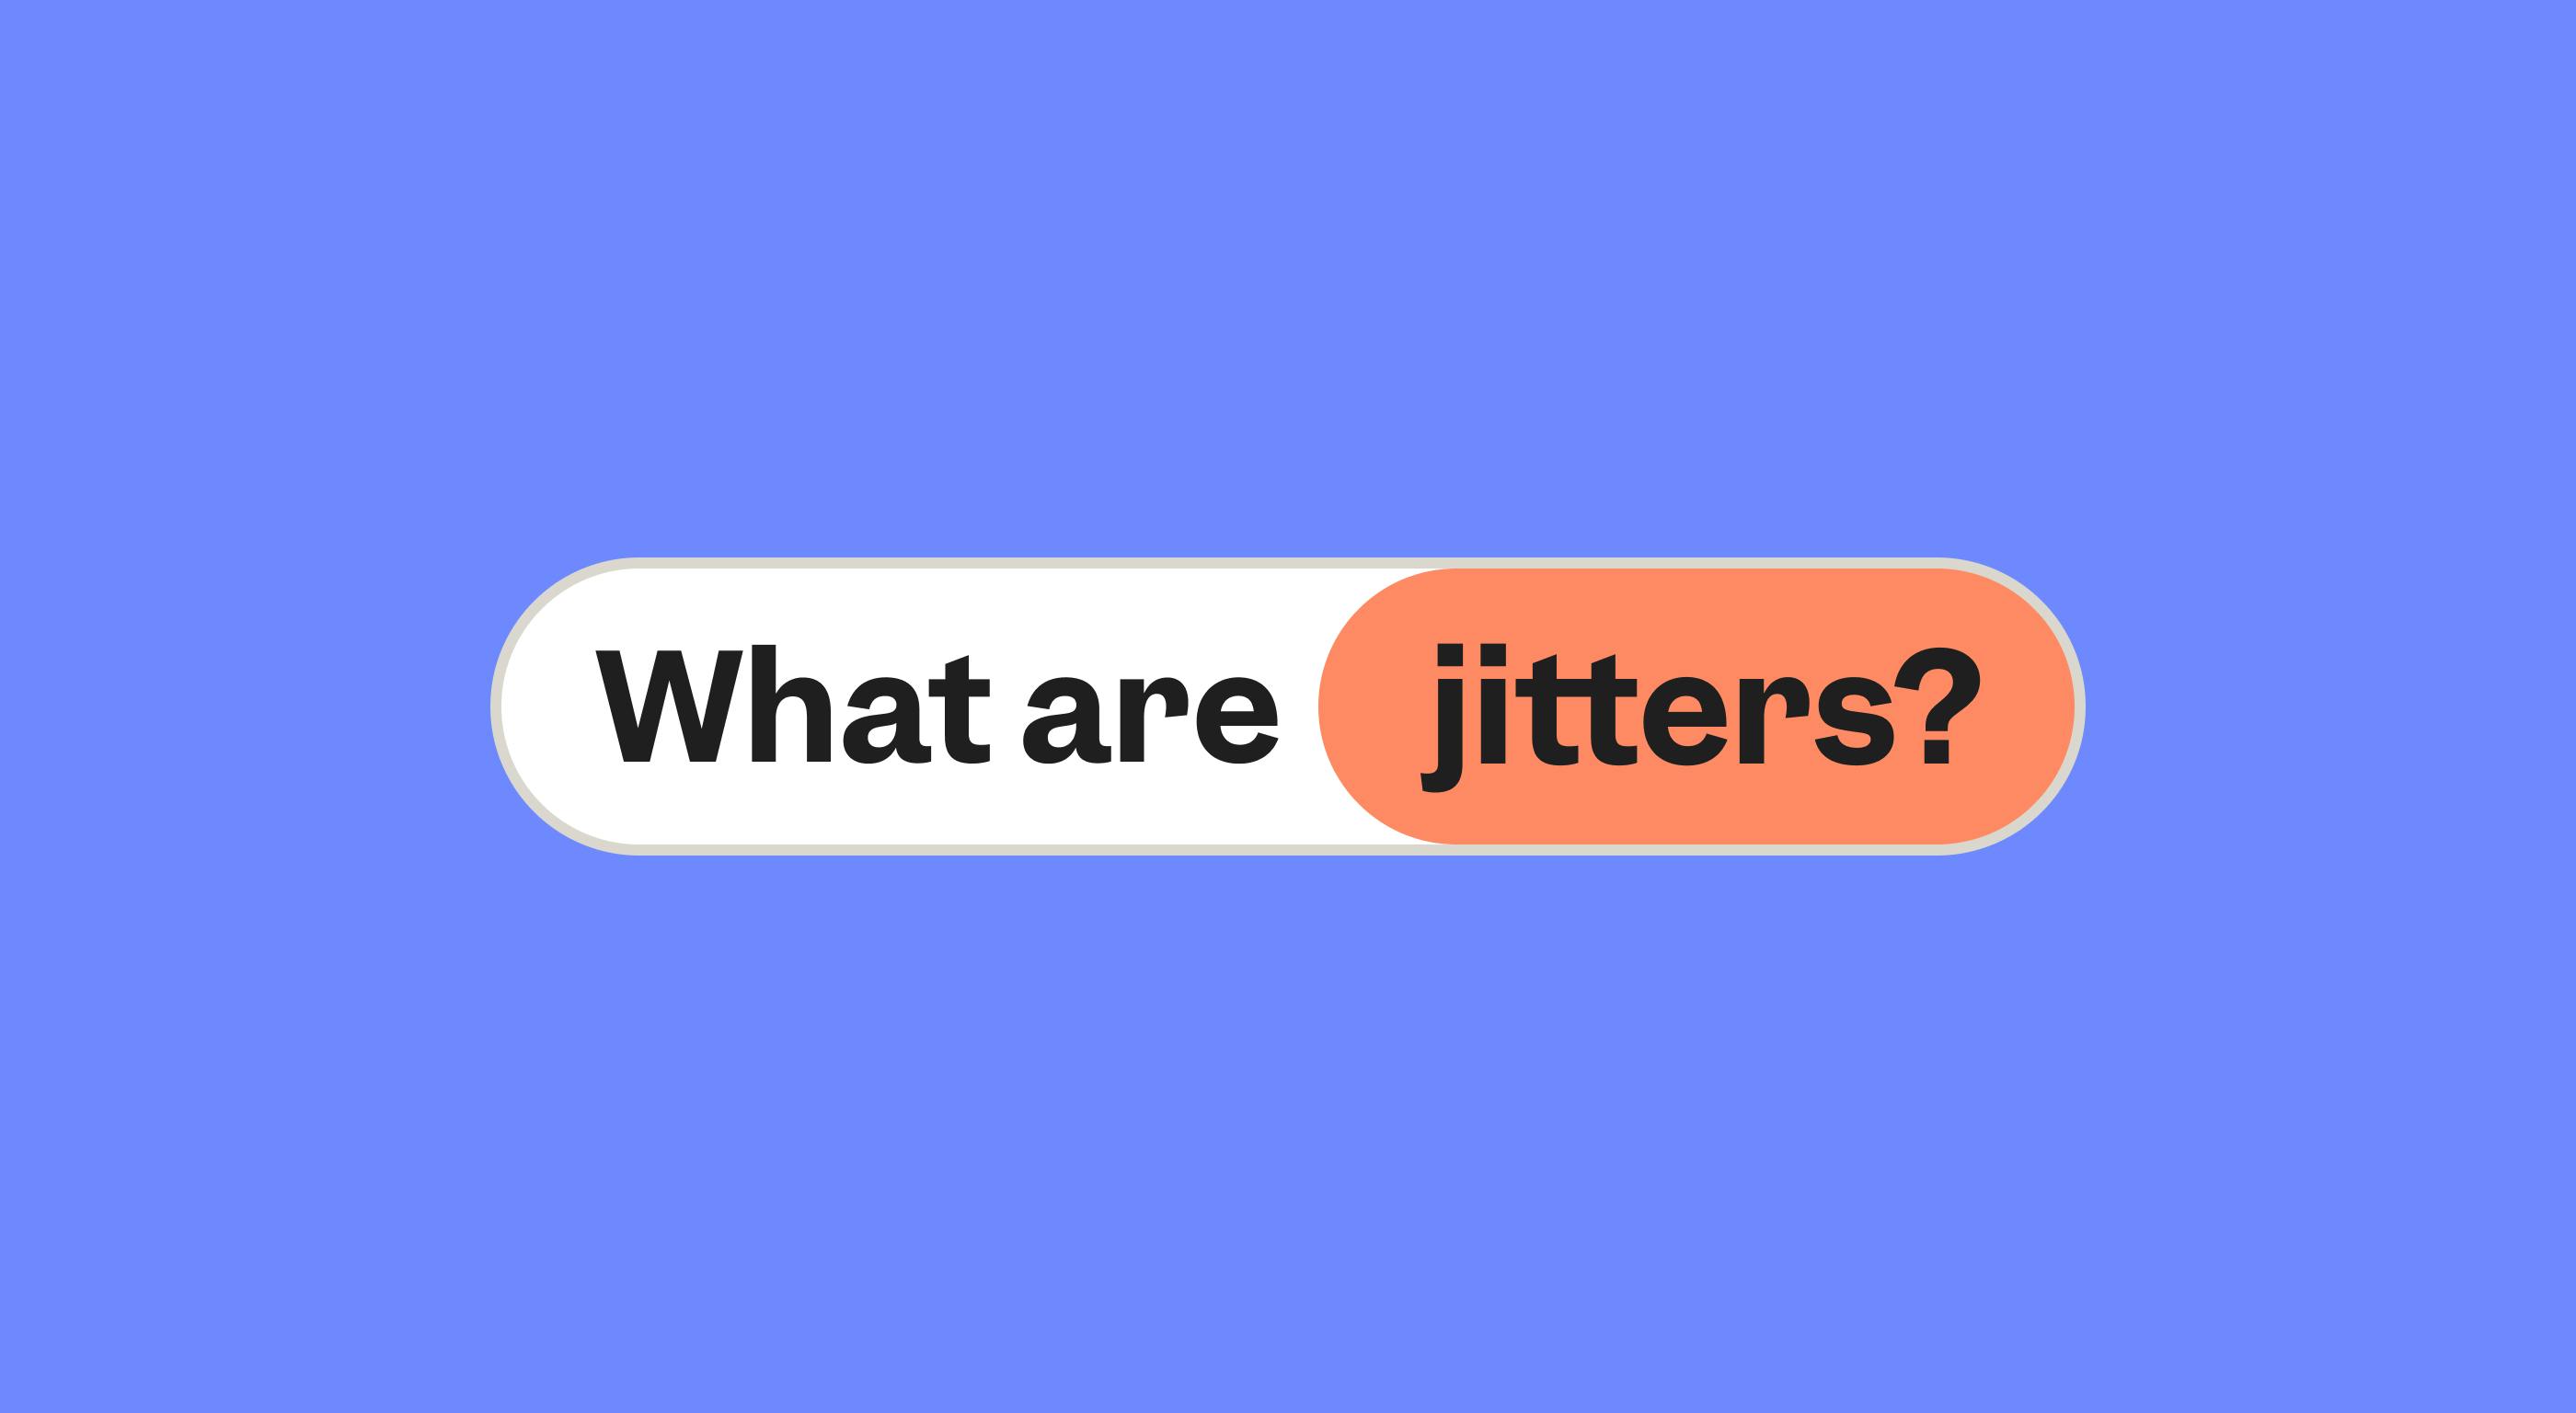 What are jitters